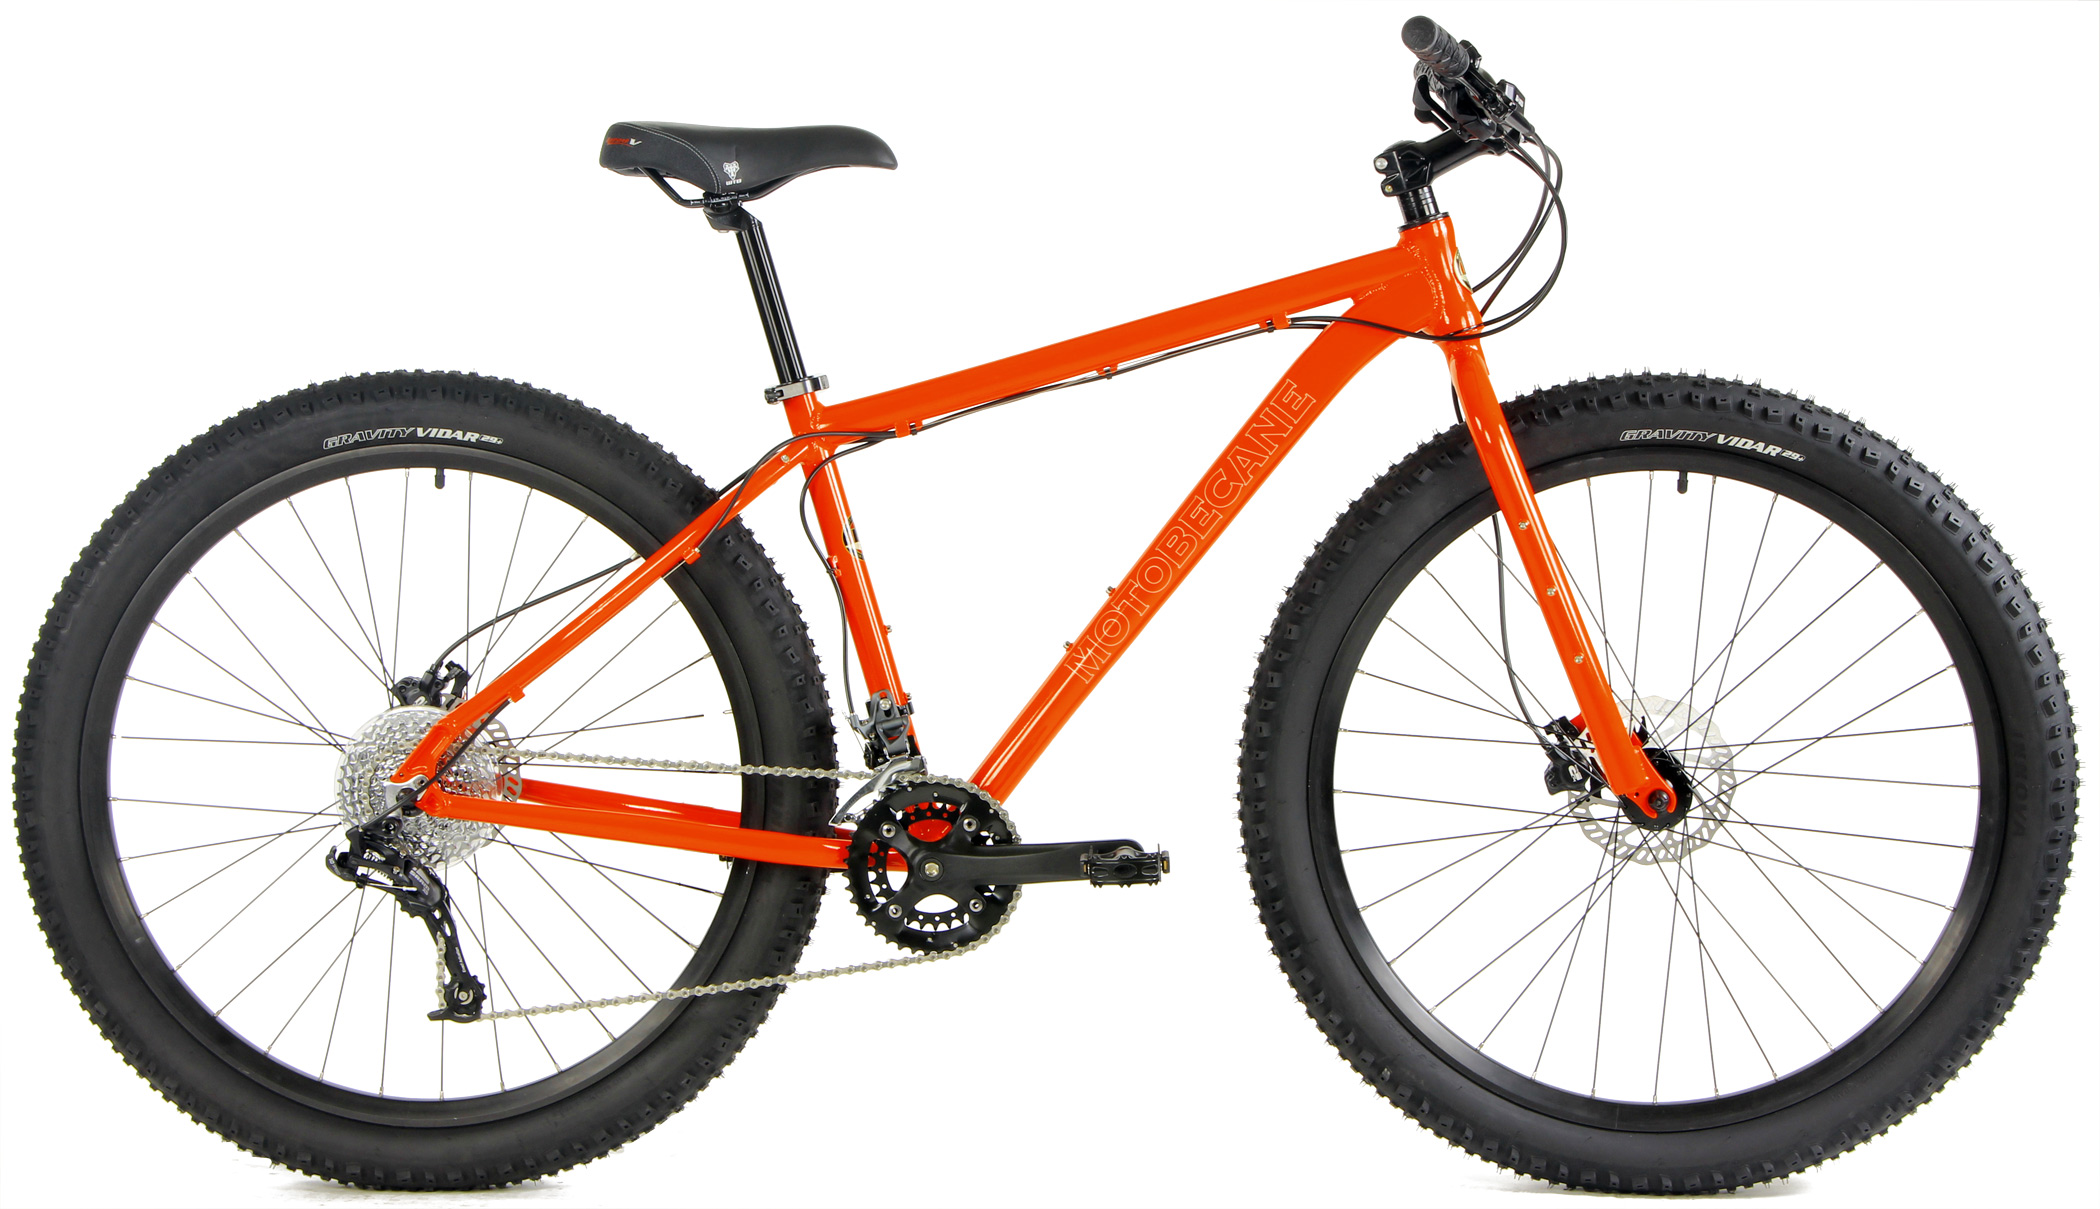 Save up to 60% off new 29Plus Fat Bikes and Mountain Bikes - MTB